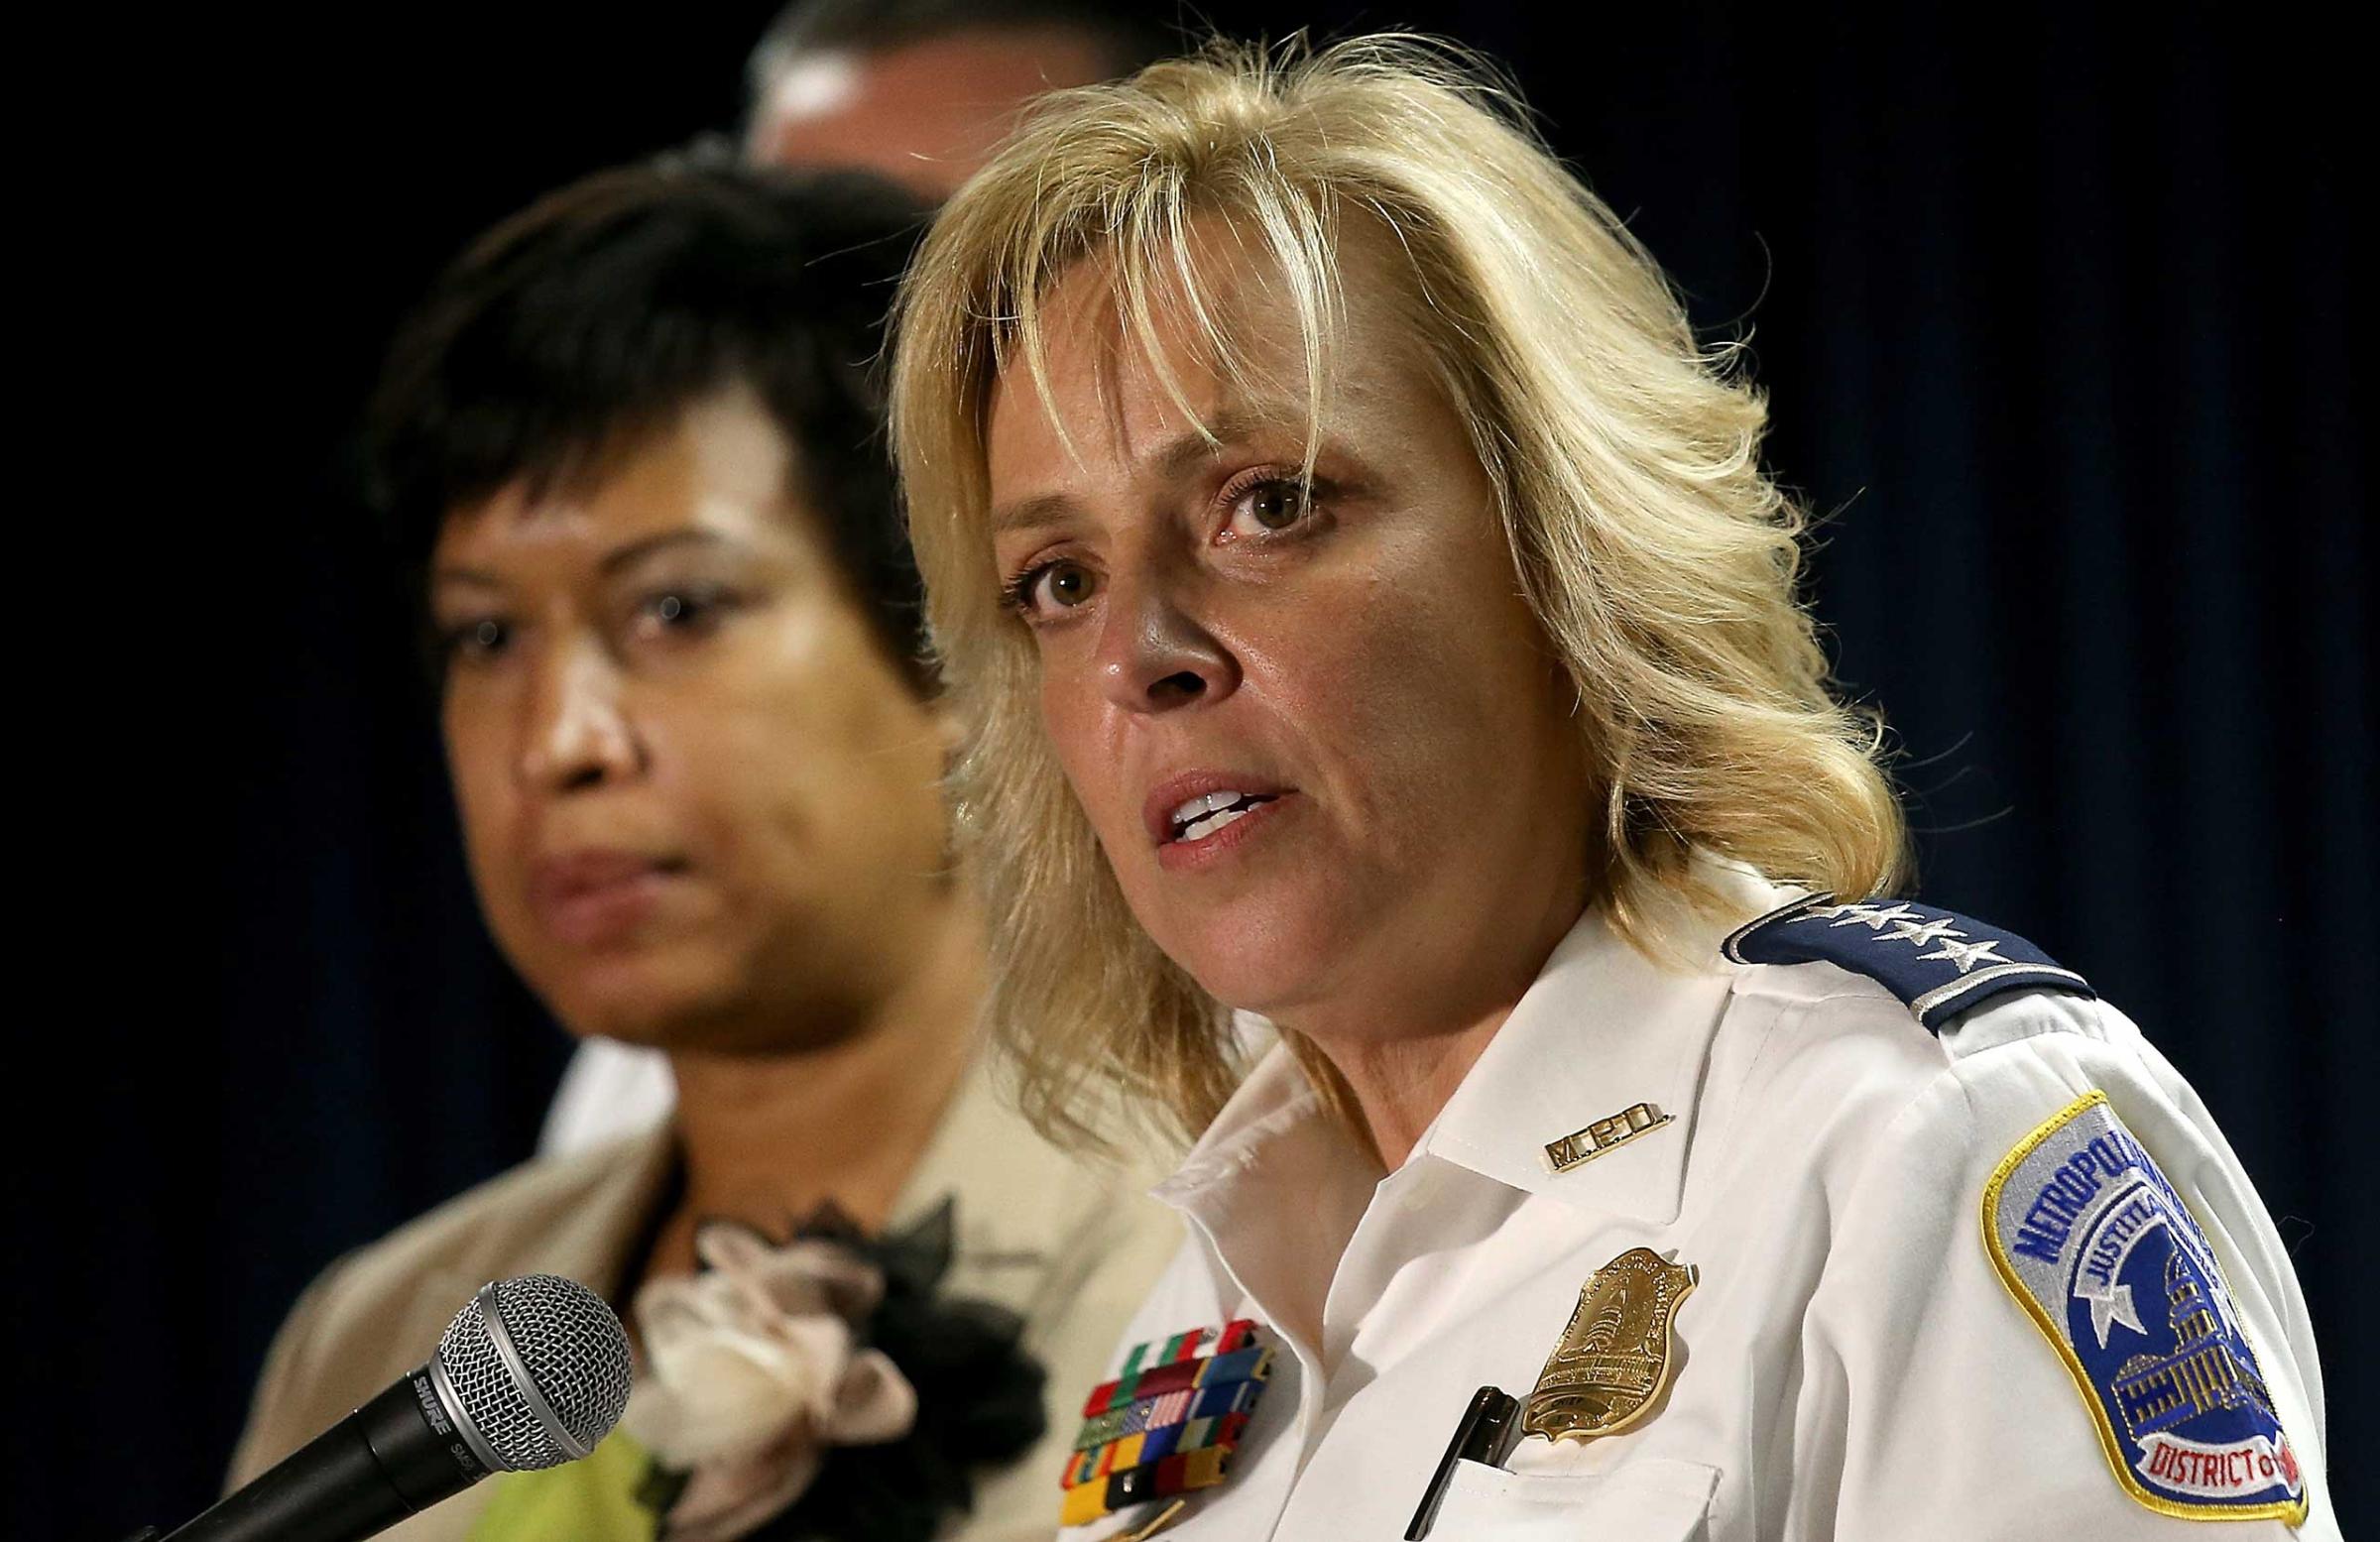 Police Chief Cathy Lanier